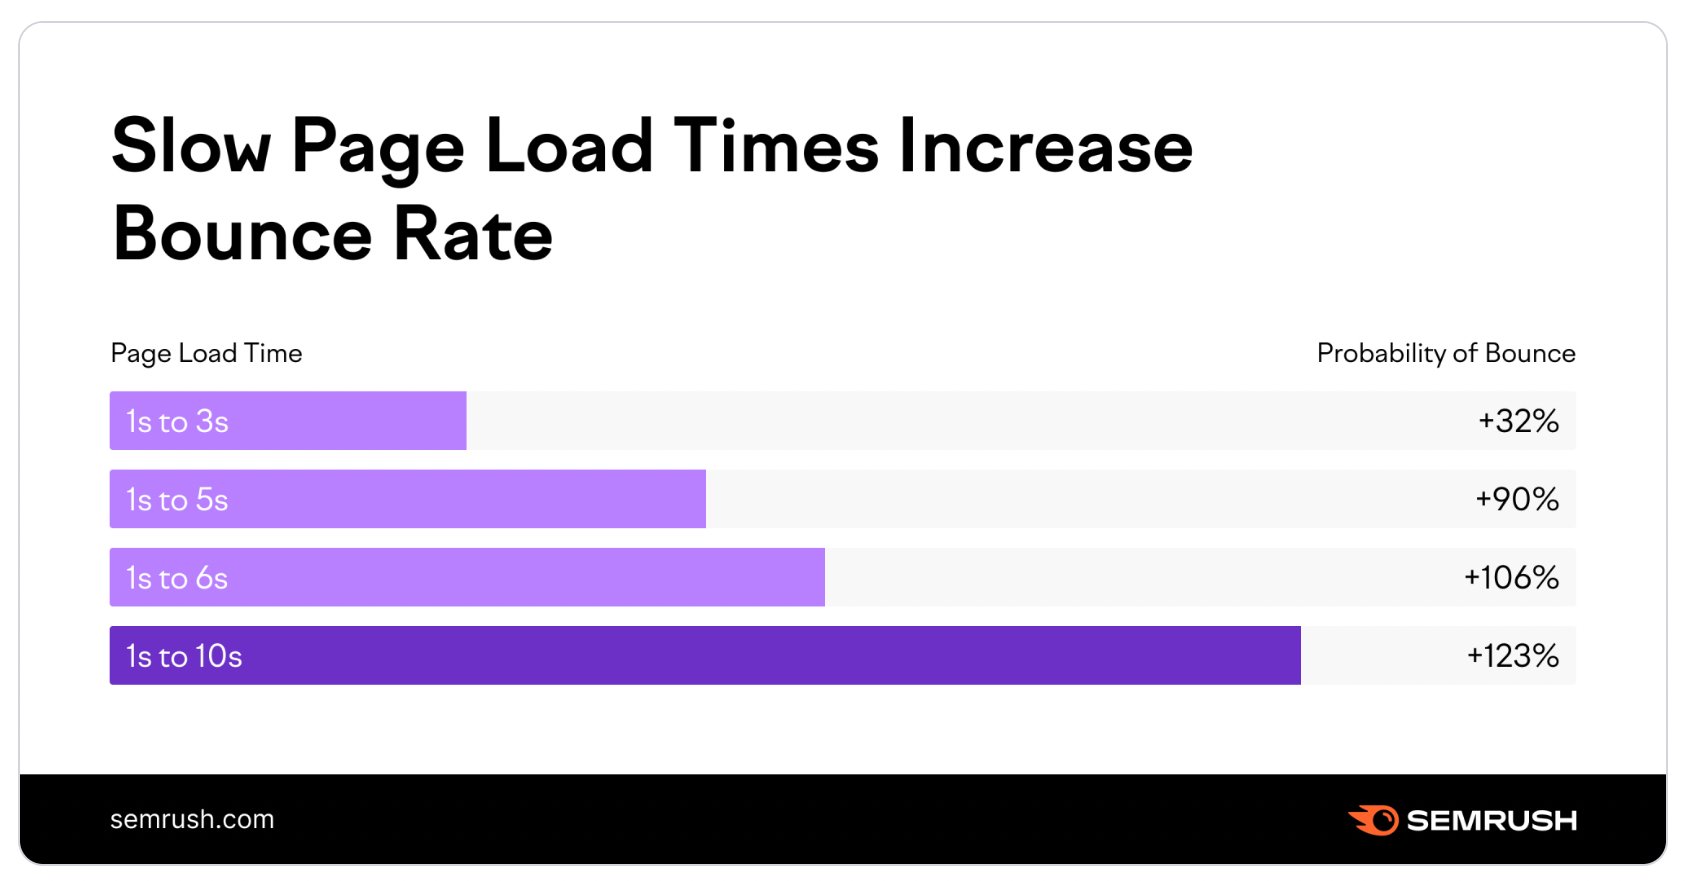 Slow Page Load Times Increase Bounce Rate